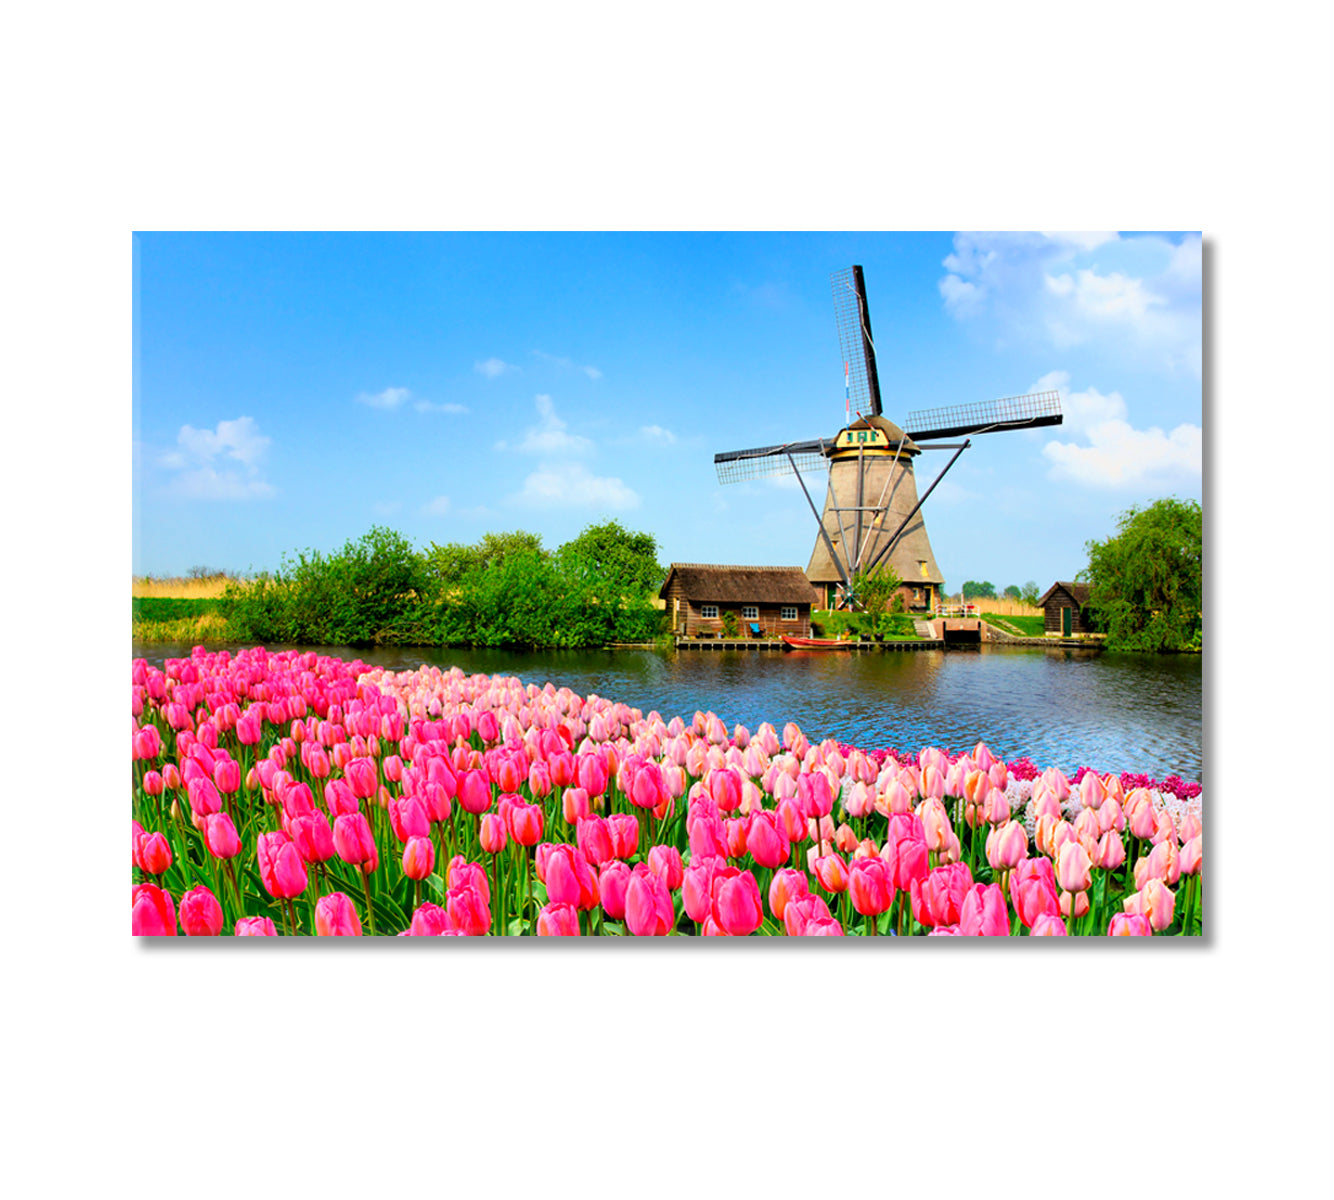 Landscape with Tulips and Windmill Canvas Print-Canvas Print-CetArt-1 Panel-24x16 inches-CetArt